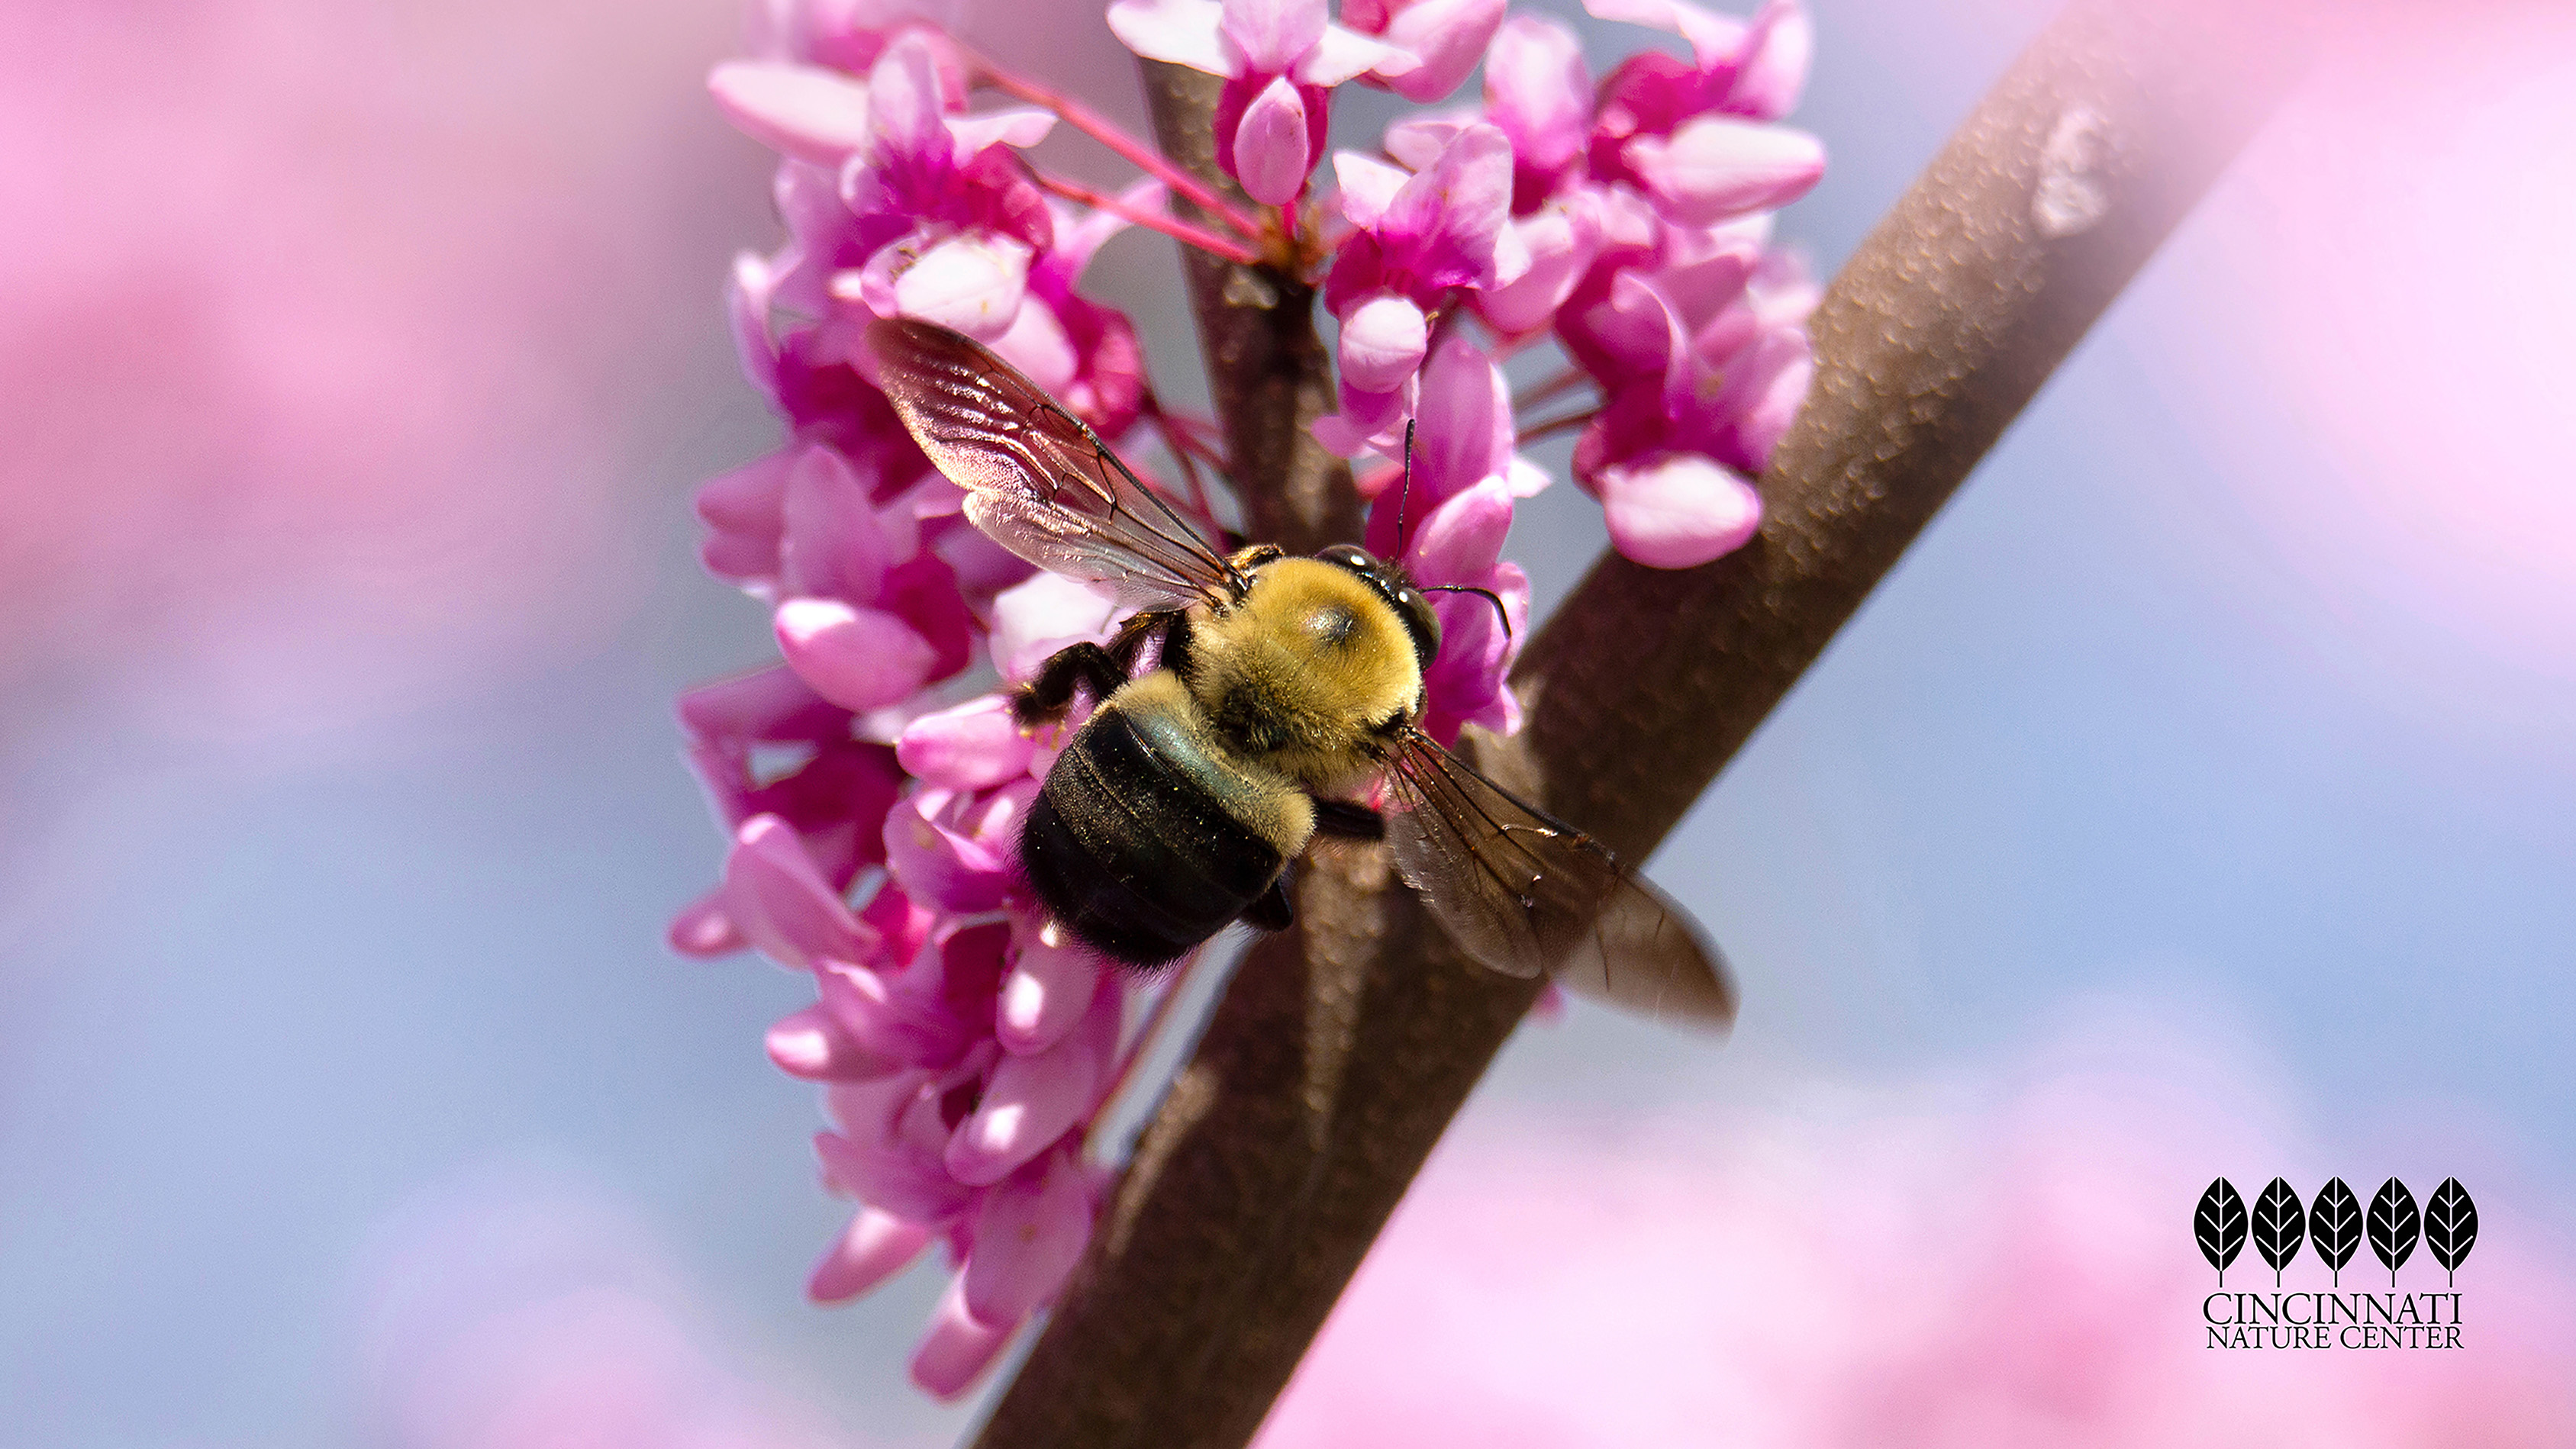 A bumblebee on Eastern pink redbud blooms